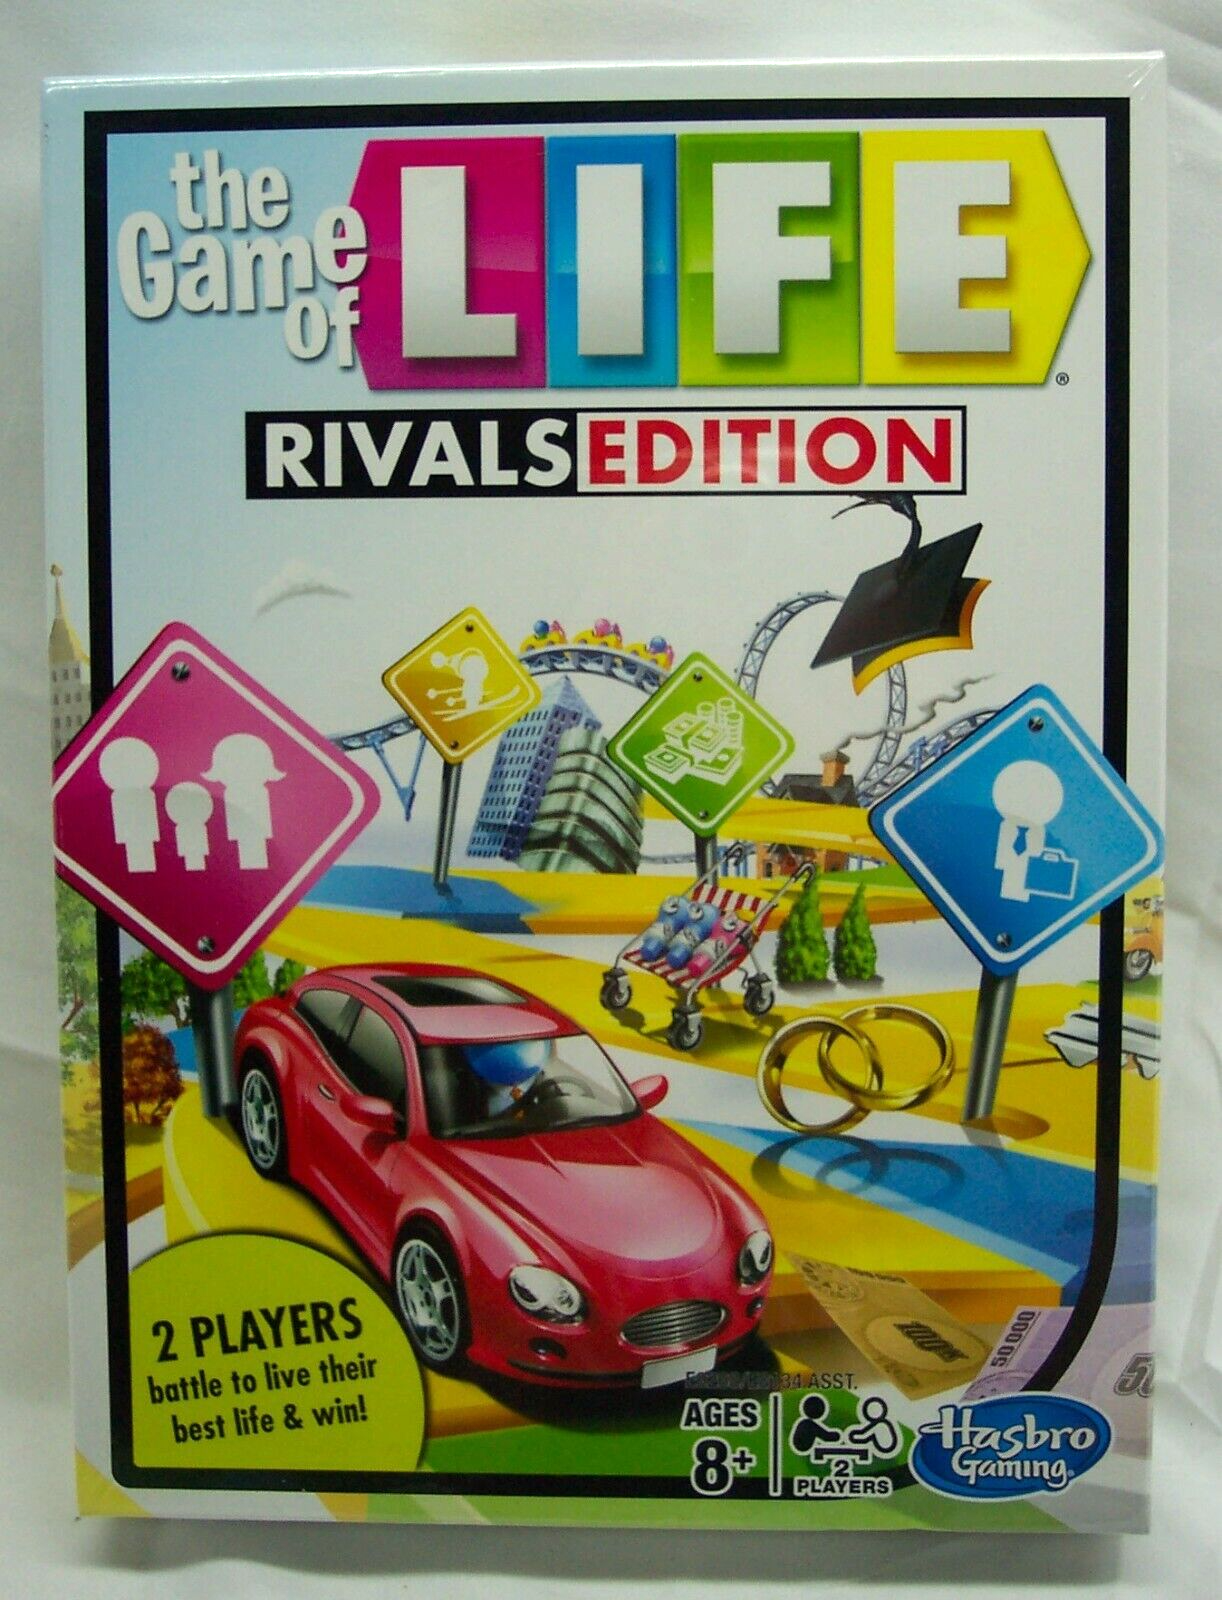 The Game Of Life RIVALS EDITION 2 Players BOARD GAME Brand NEW - $16.34